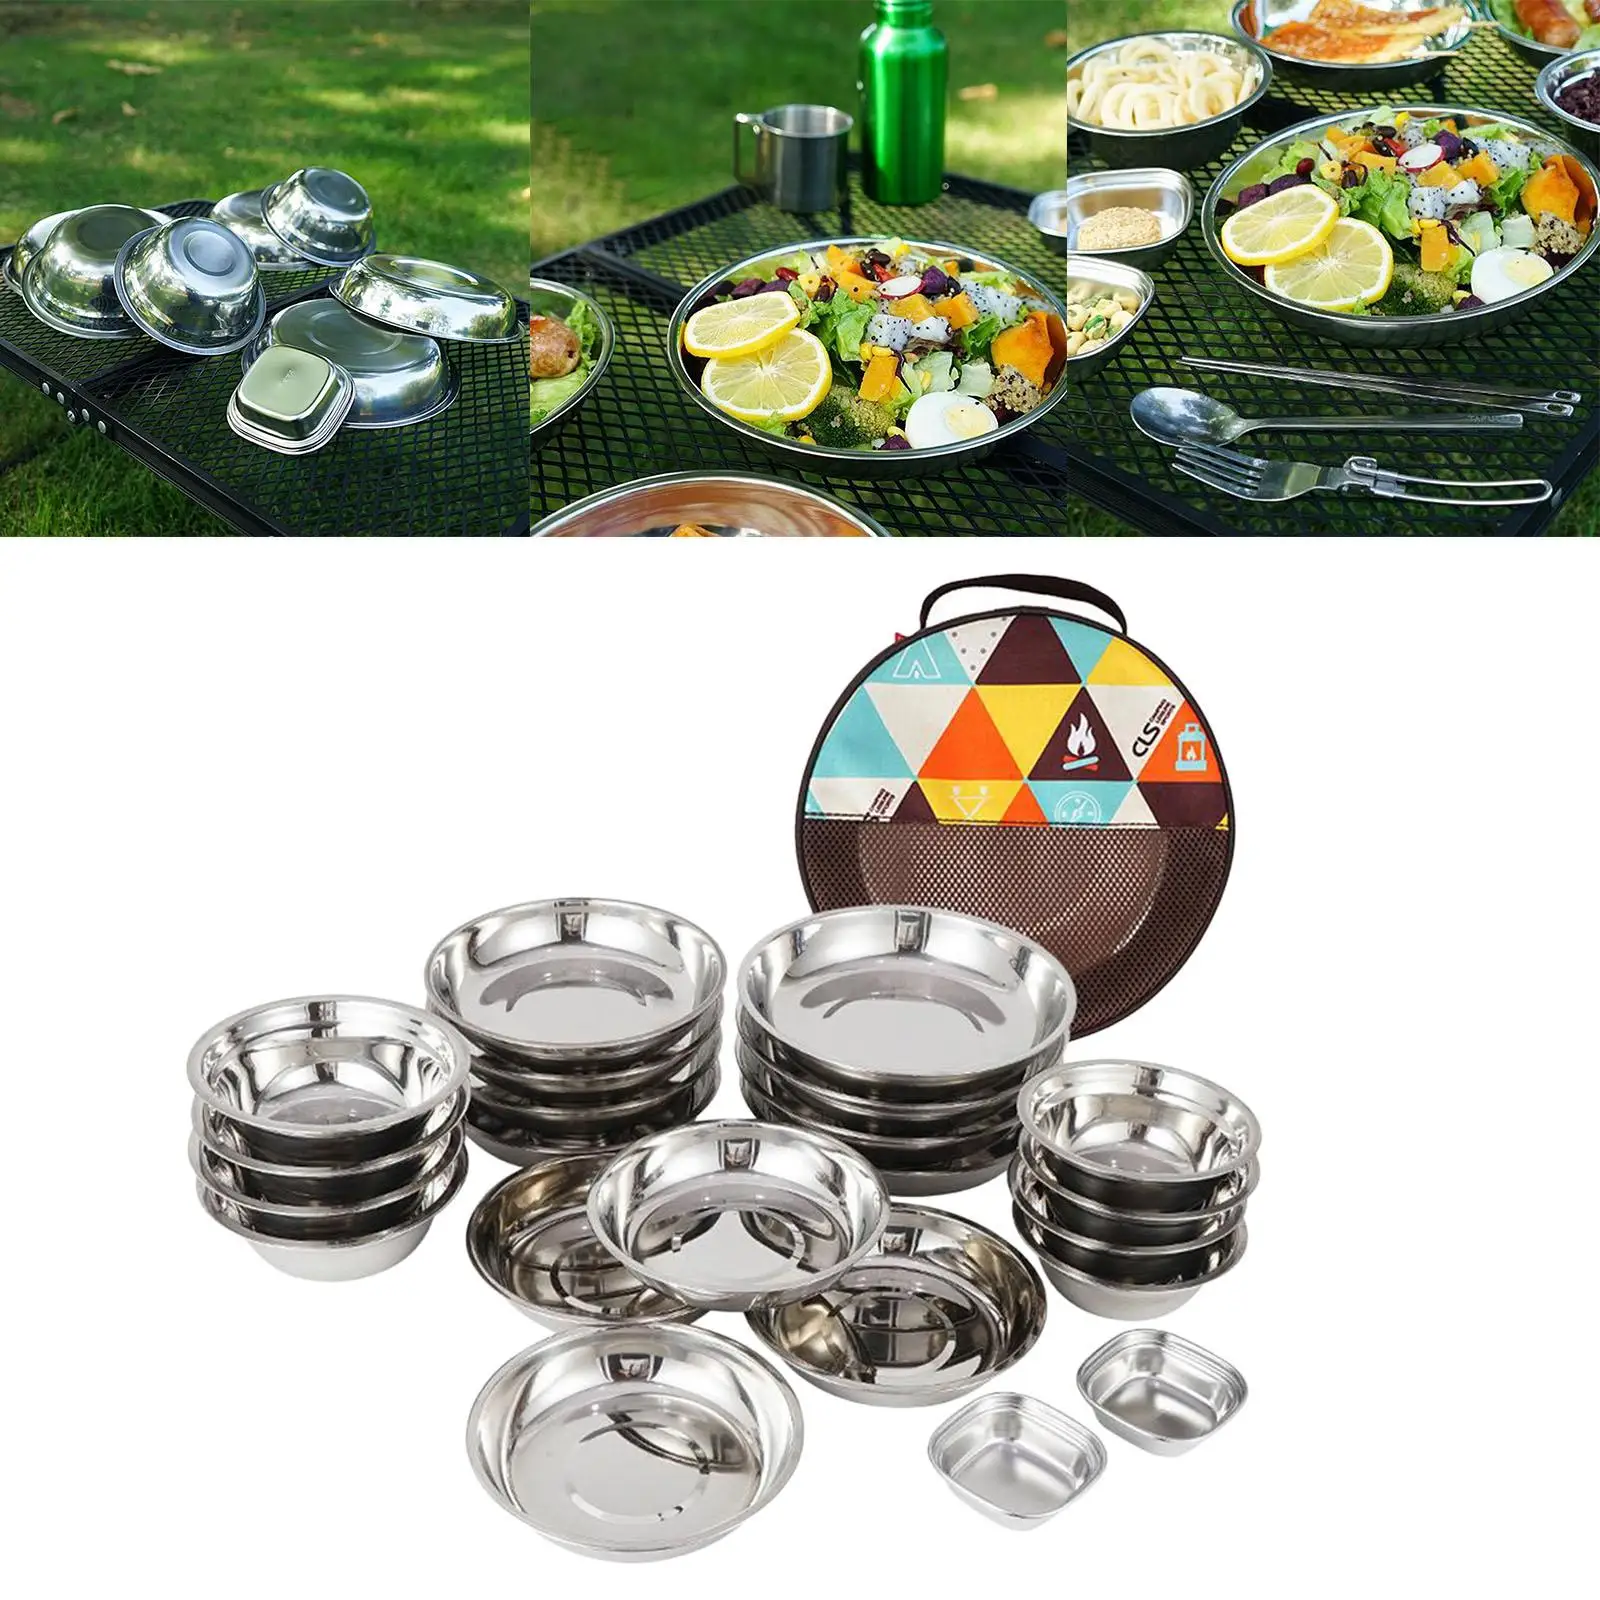 22 in 1 Stainless Steel Plate Set Portable Dinnerware Cooking  Bowl for